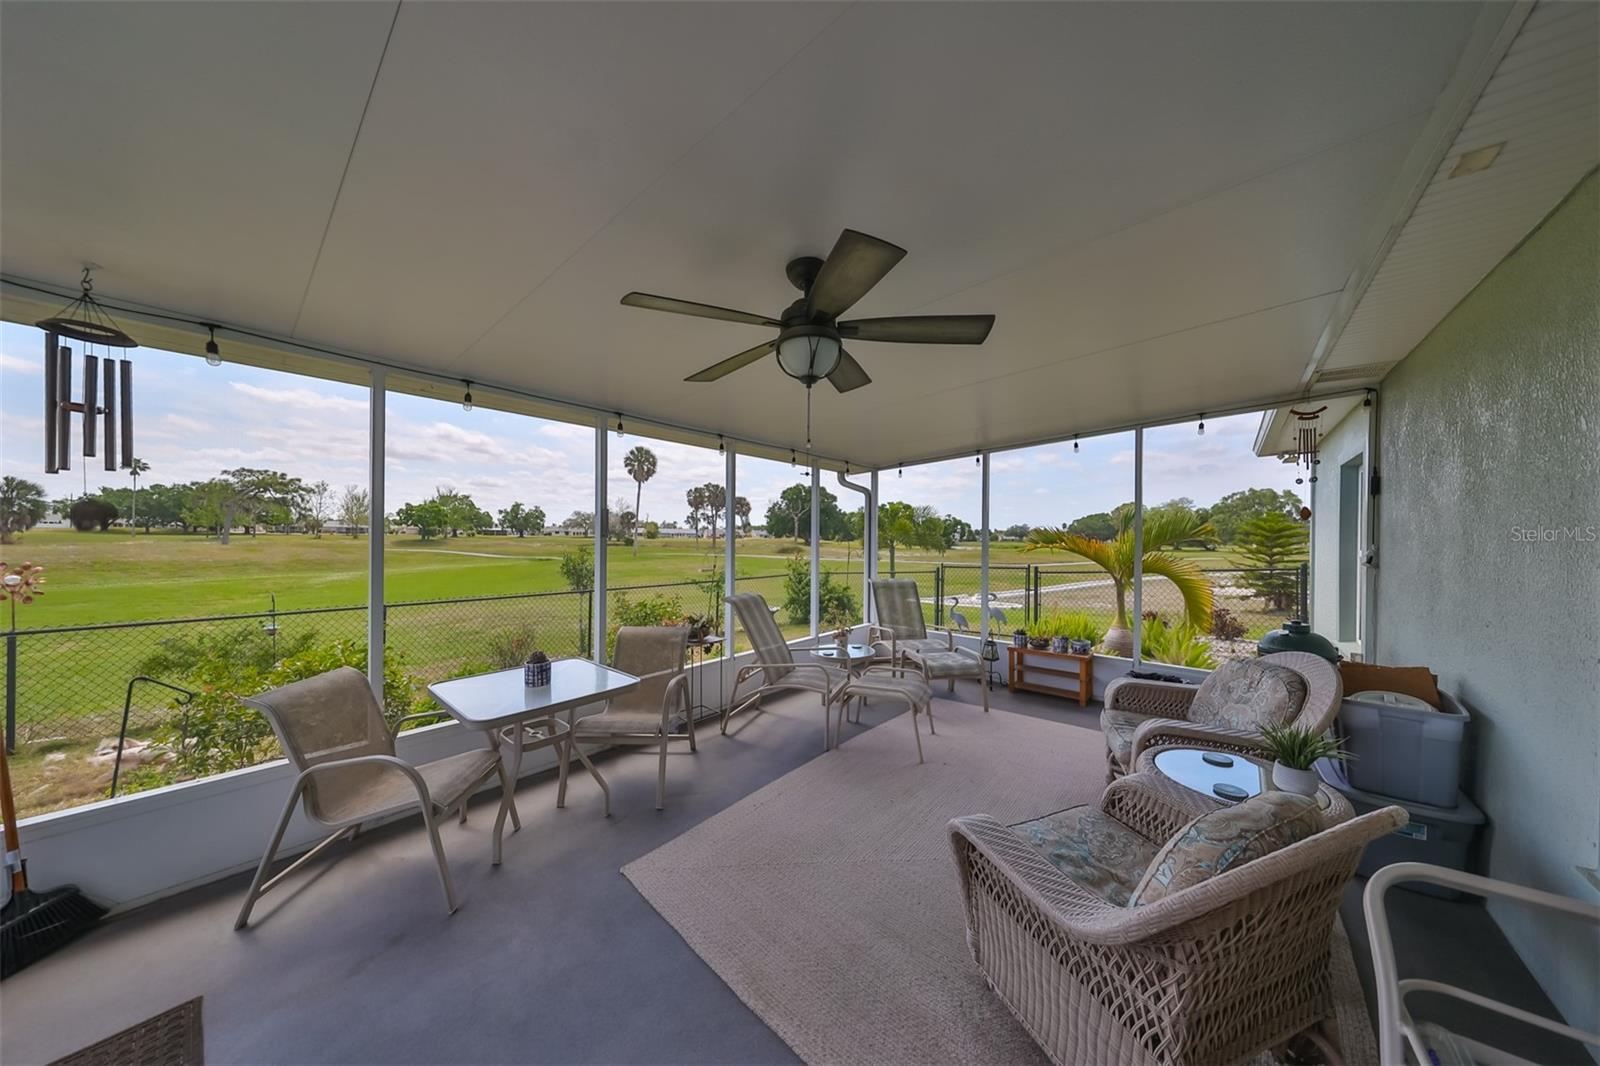 Covered, large screened patio includes custom ceiling fan with lighting perfect for enjoying all year round. NO BACKYARD NEIGHBORS!